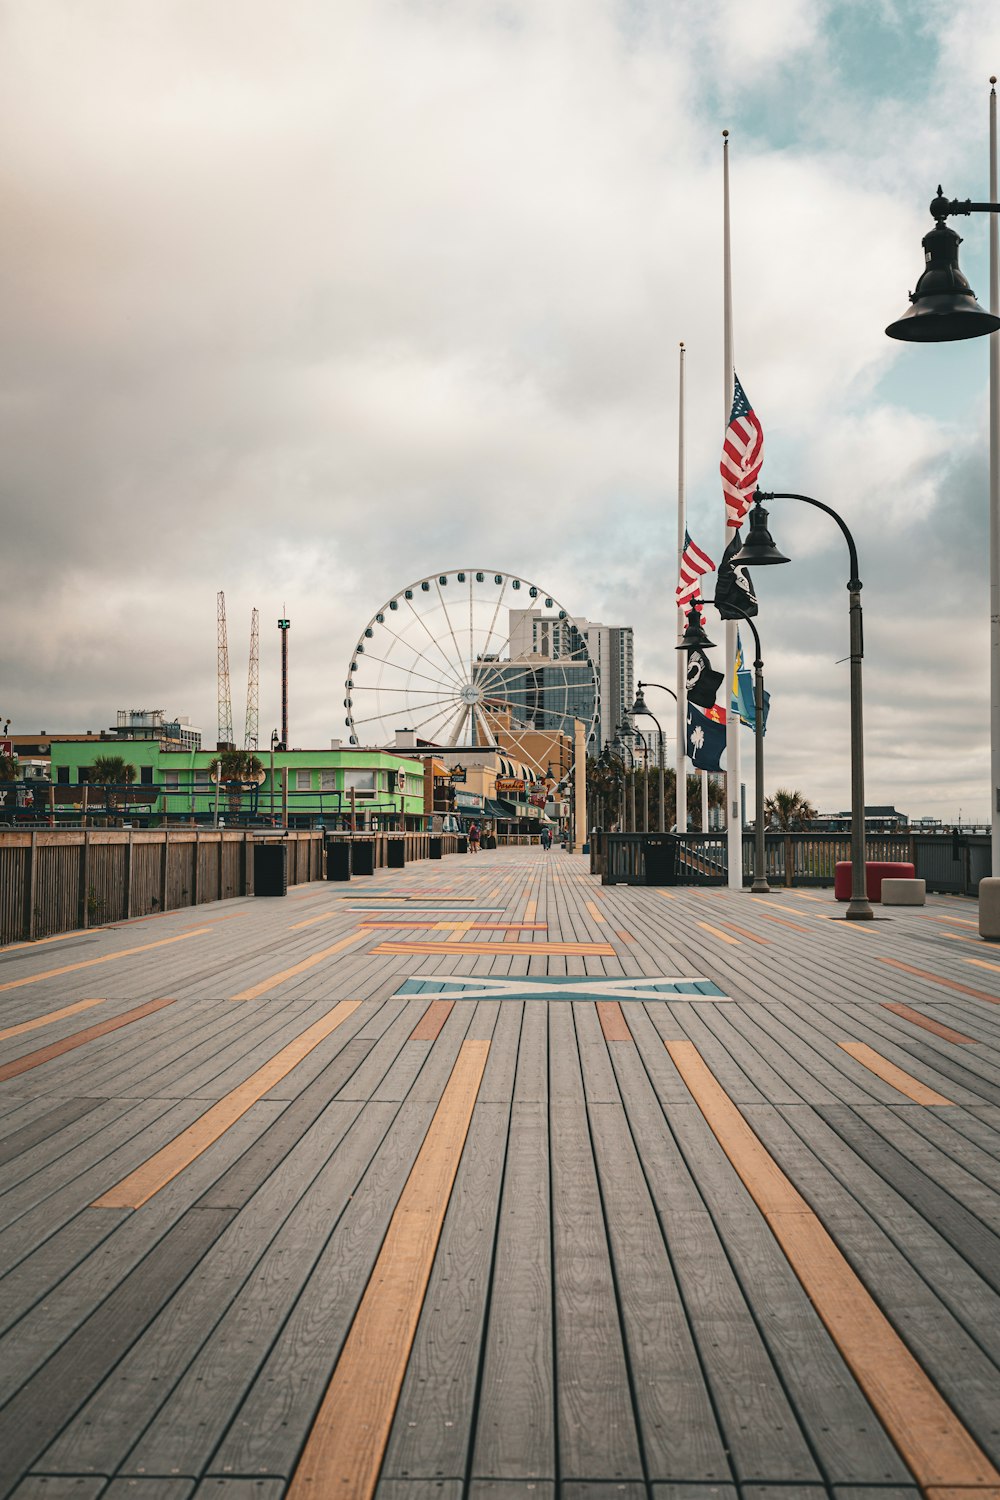 a boardwalk with a ferris wheel in the background